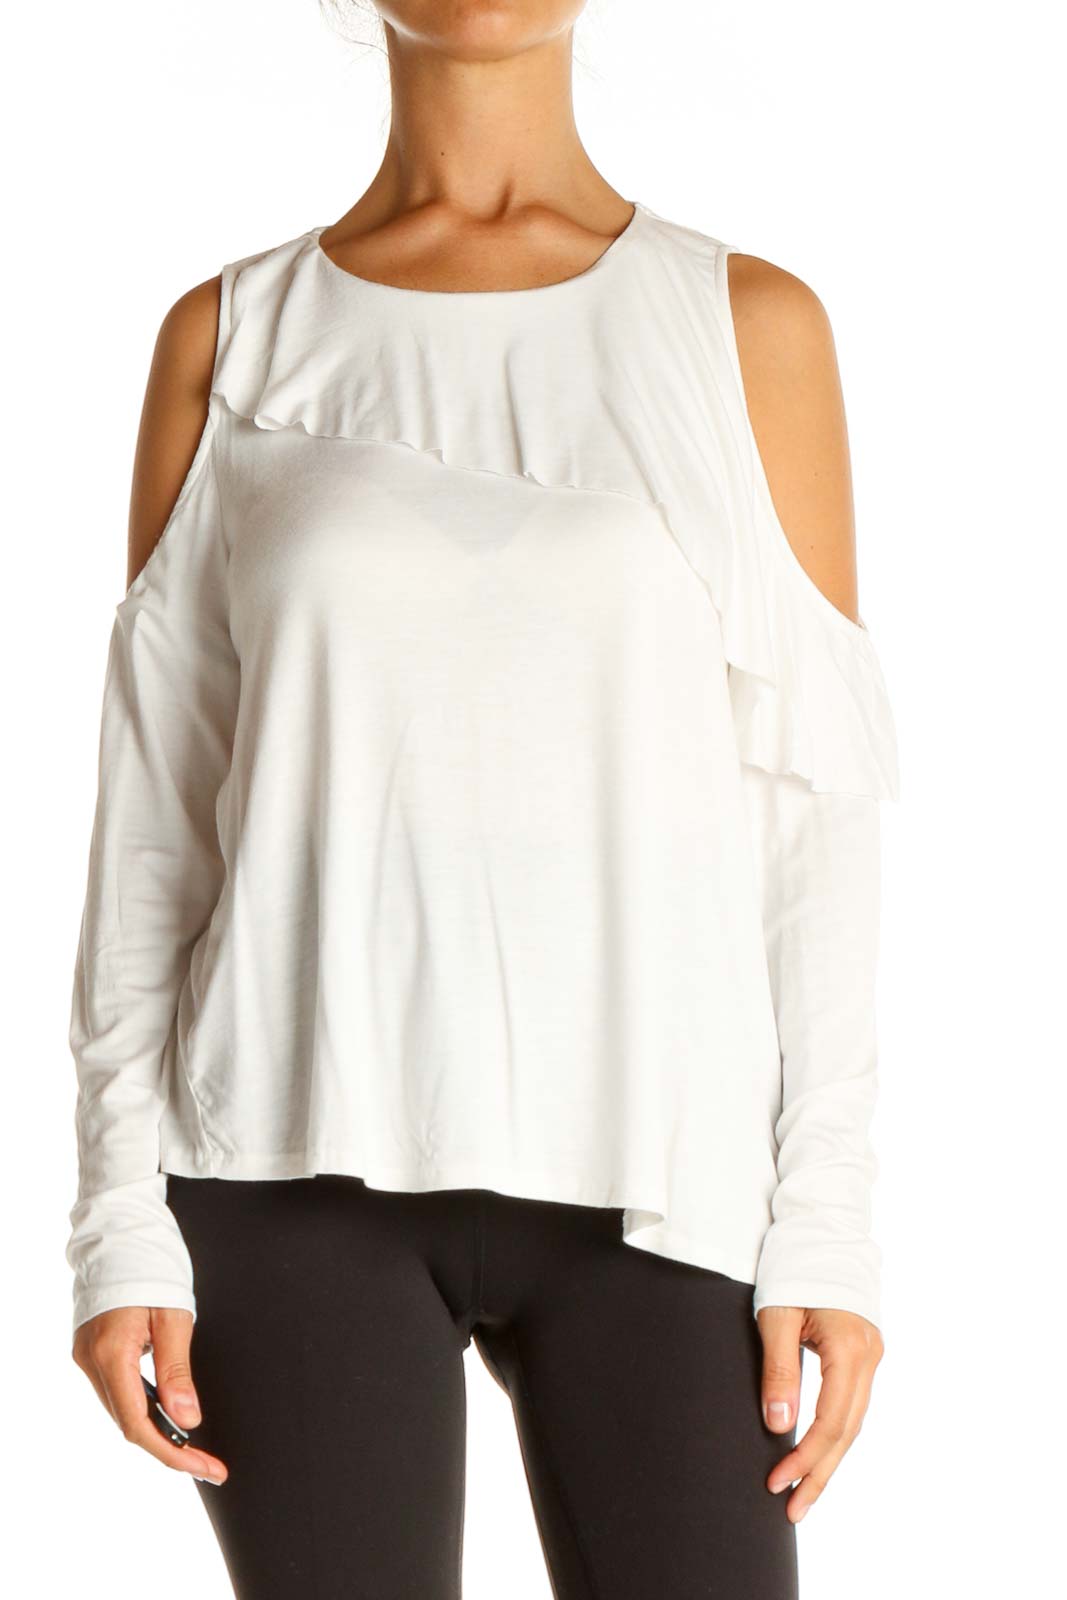 White Solid Chic Blouse Front